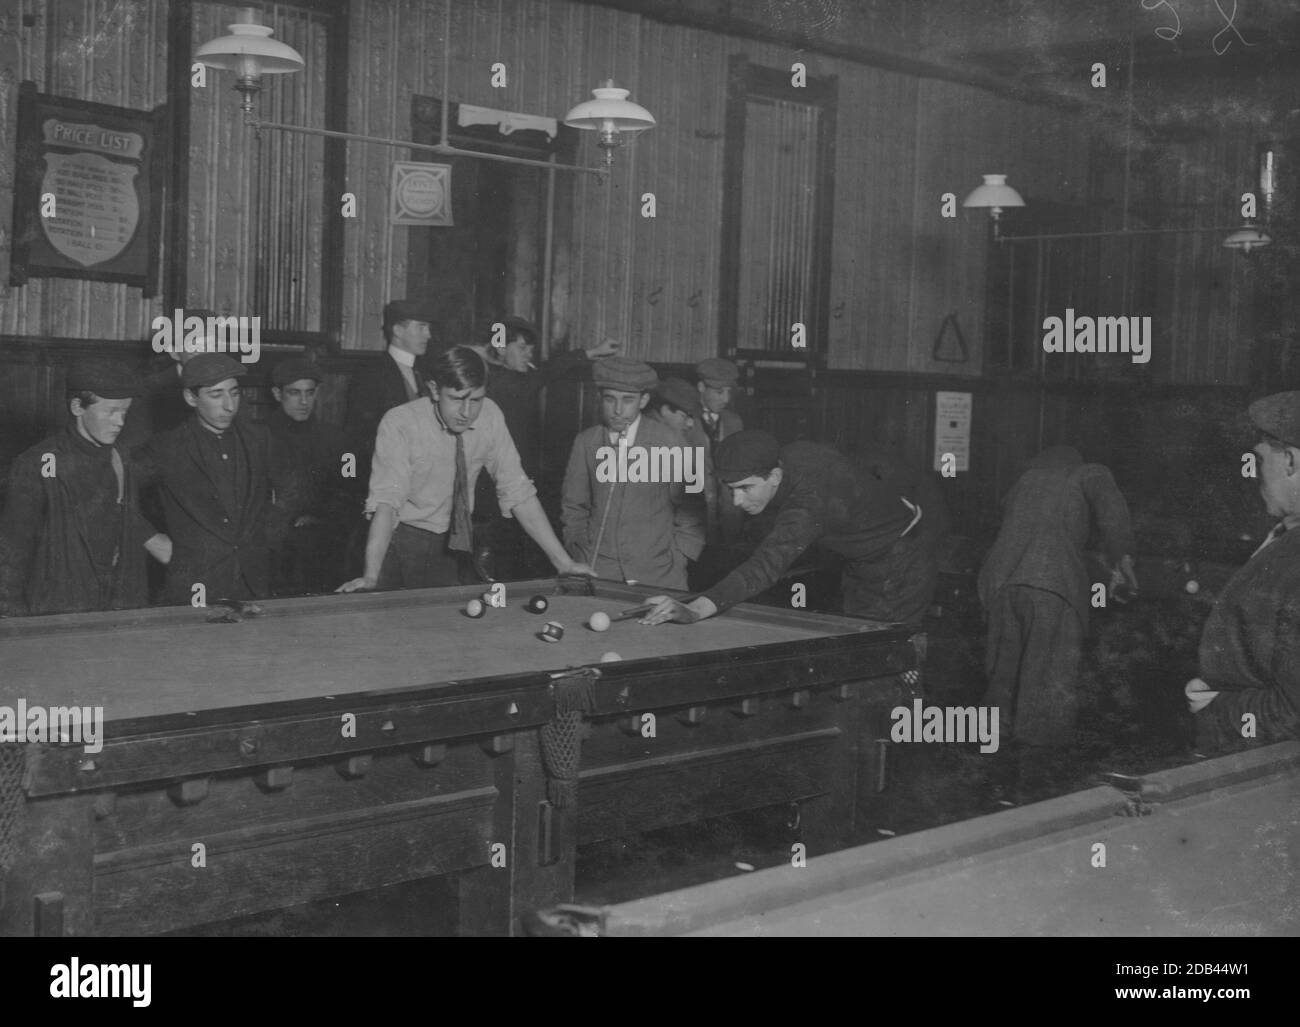 Elm Pool Room (inside): Nathan Sher, 69 Walden St. William Donovan, Elm Pool Room. George, 28 Elm St. (youngest pin boy). Bill Simmons (manager). Frank Worcester, 28 Elm St. Alton Tripp, 31 High St. Theodore Lewis, Elm Pool Room. Donnie Murray, Elm Pool Room. Joe Correia, 36 Elm St. Location: New Bedford, Massachusetts.. Stock Photo